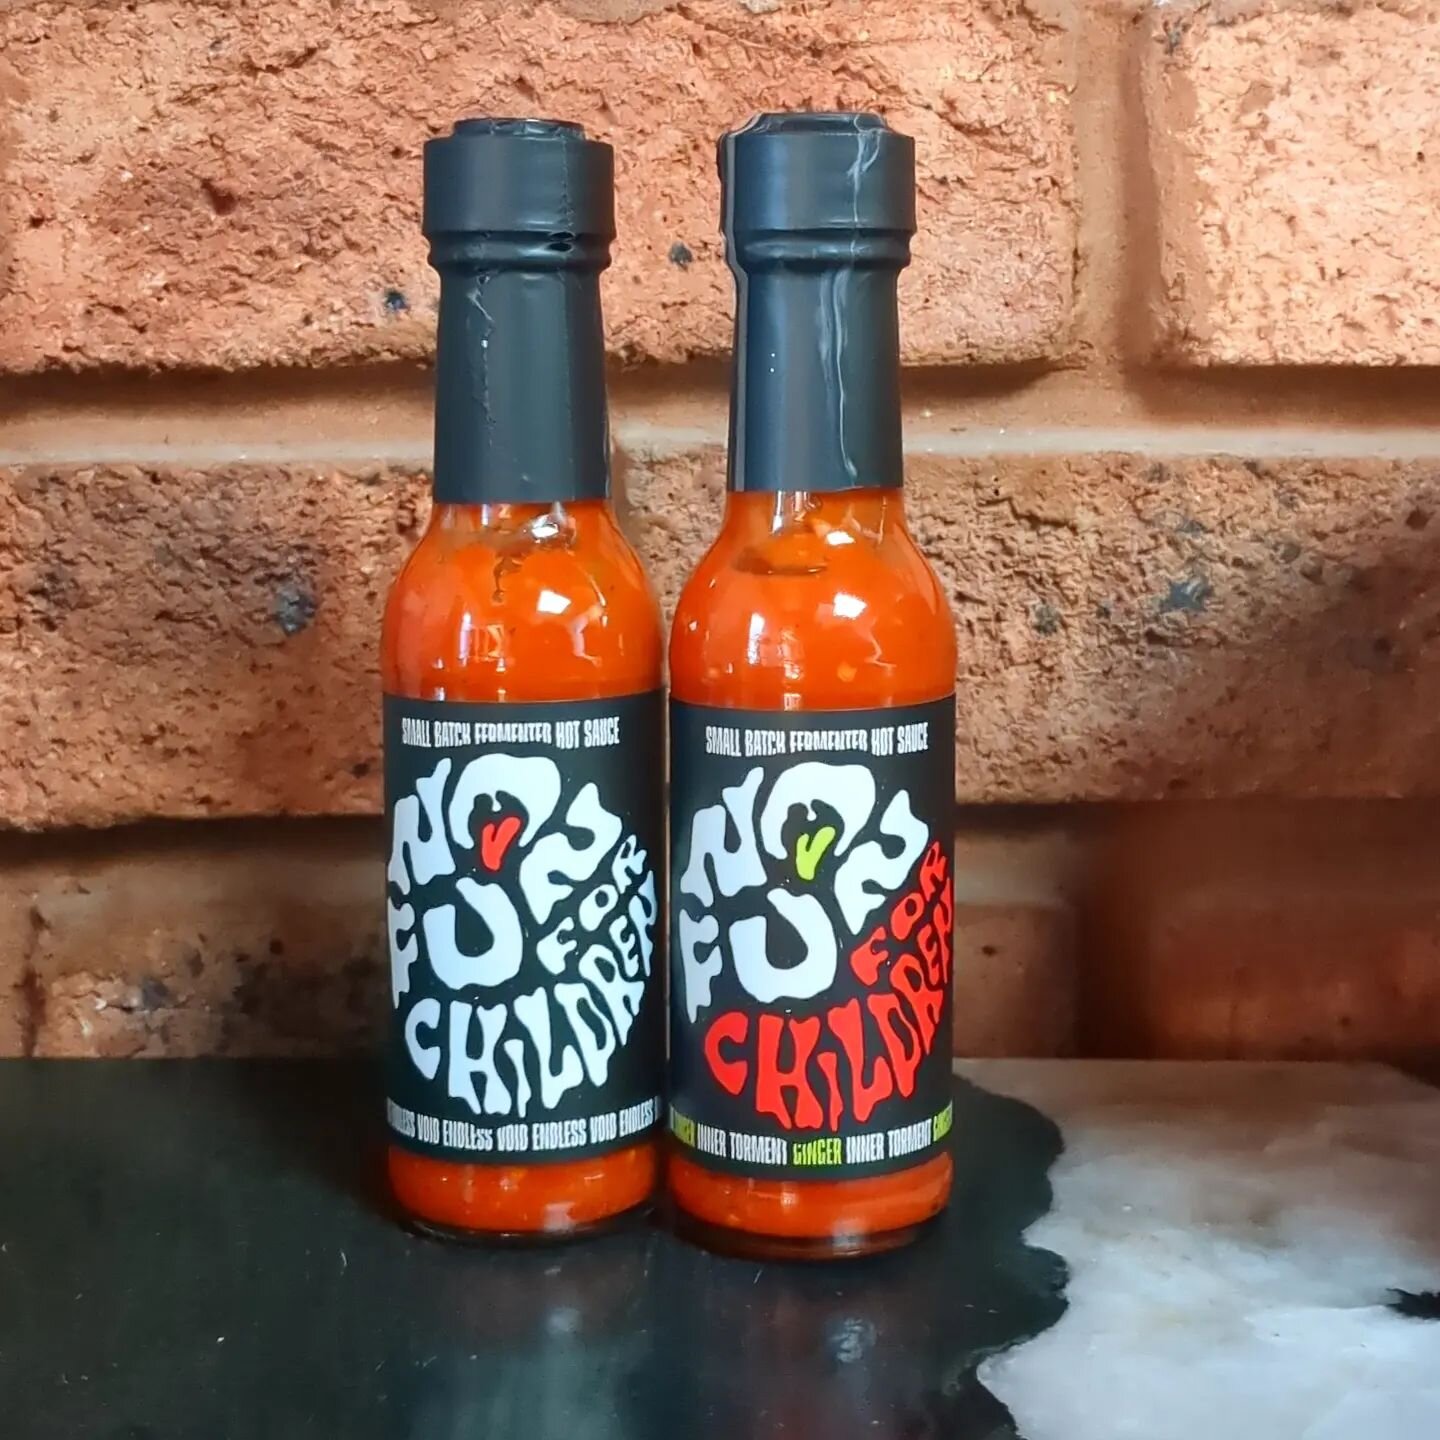 FIRST DROP OF BATCH 10 - NOW ONLINE

ENDLESS VOID - A NO FUN SIGNATURE SAUCE
Fermented, smoky and sour
31-day fermented habanero, garlic and shallots, smoked for 8 hours and lovingly blended and bottled for y'all heat seekers 🔥🔥🔥

and back by popu